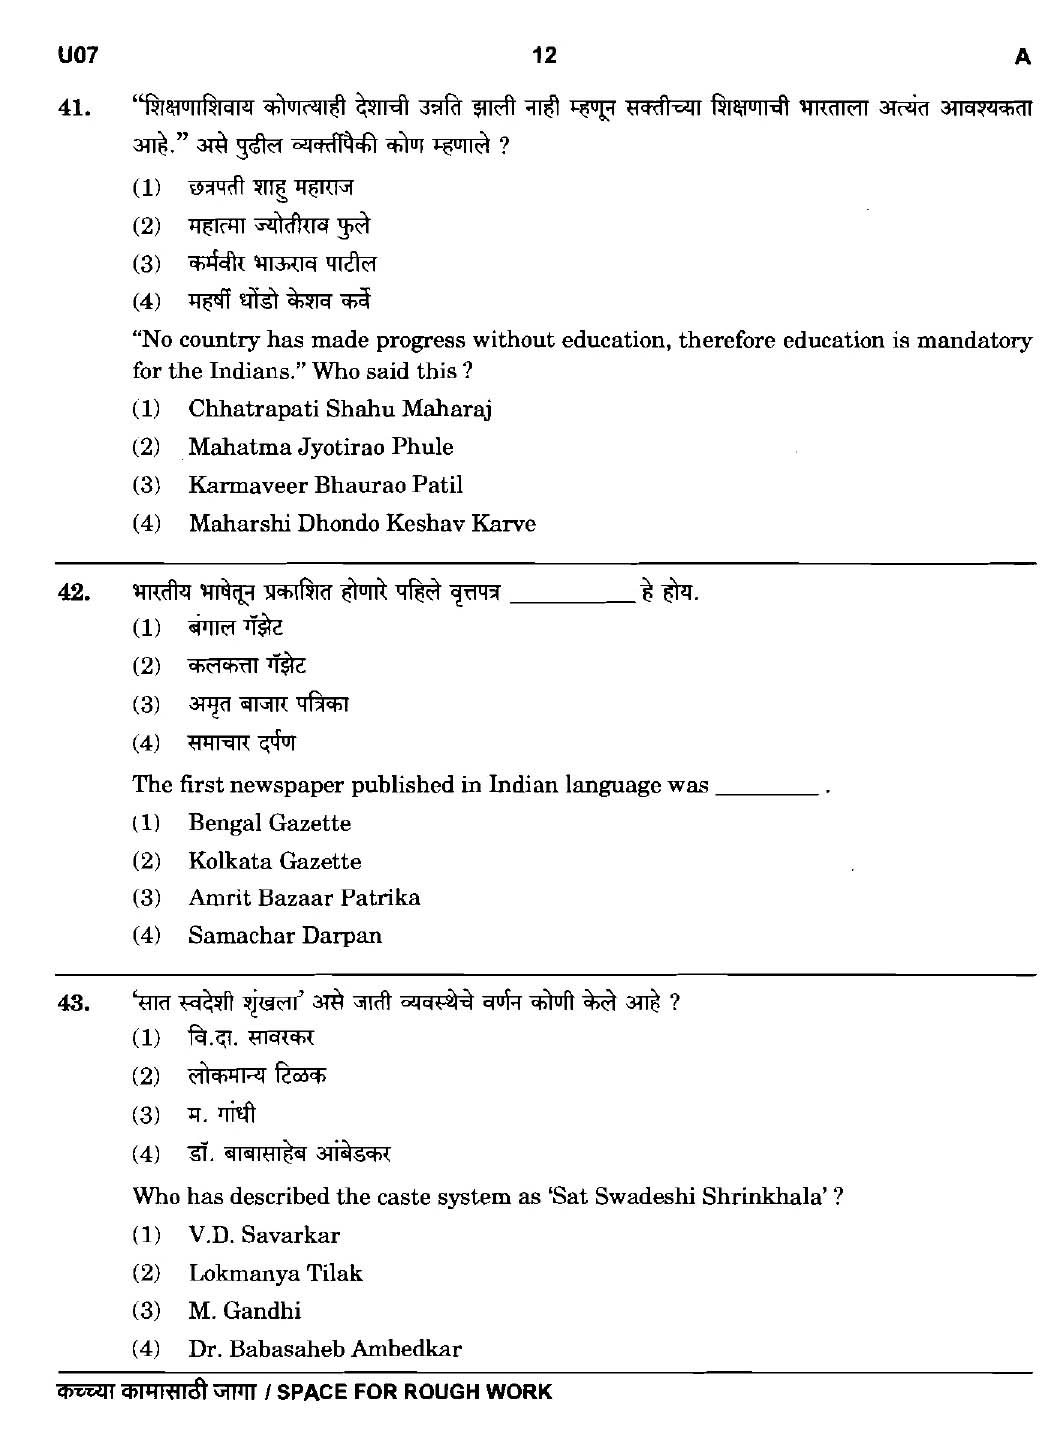 MPSC Agricultural Services Preliminary Exam 2016 Question Paper 11